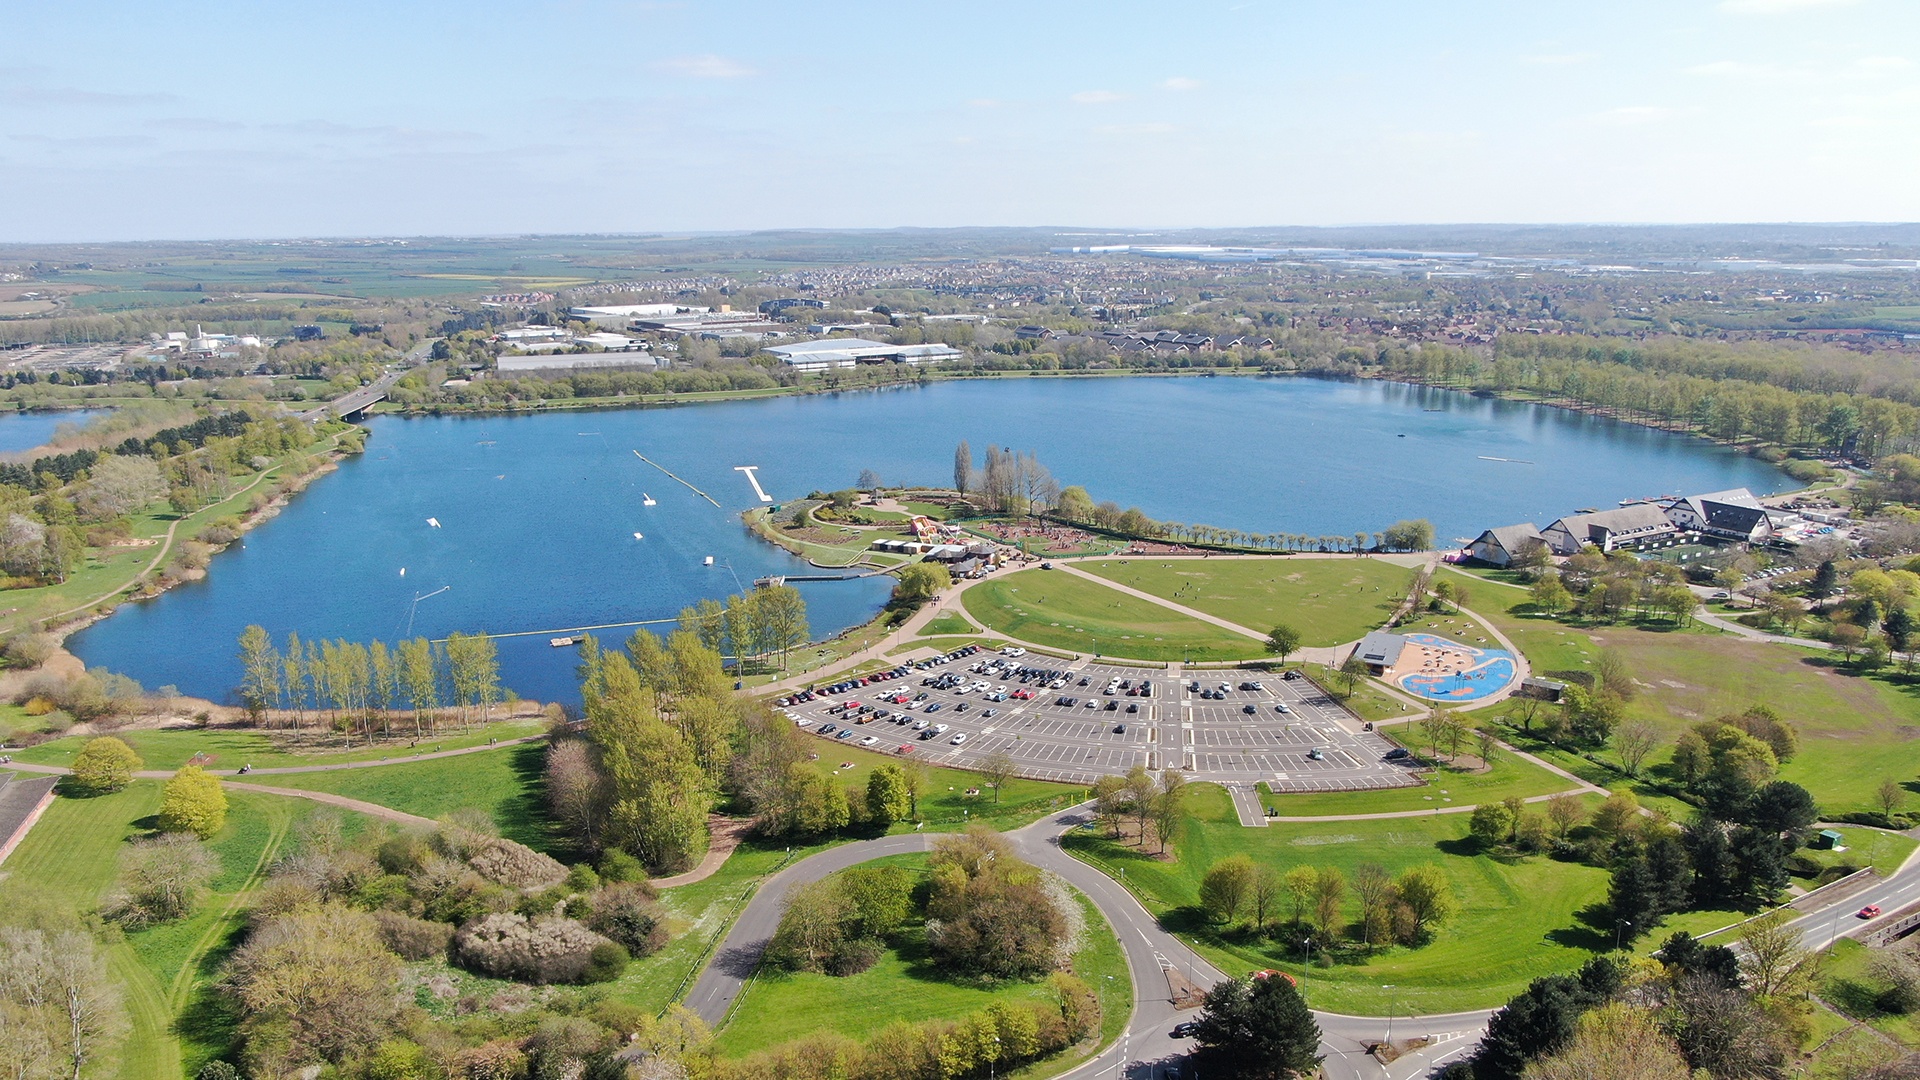 Milton Keynes Council and Destination MK aim to boost the visitor economy